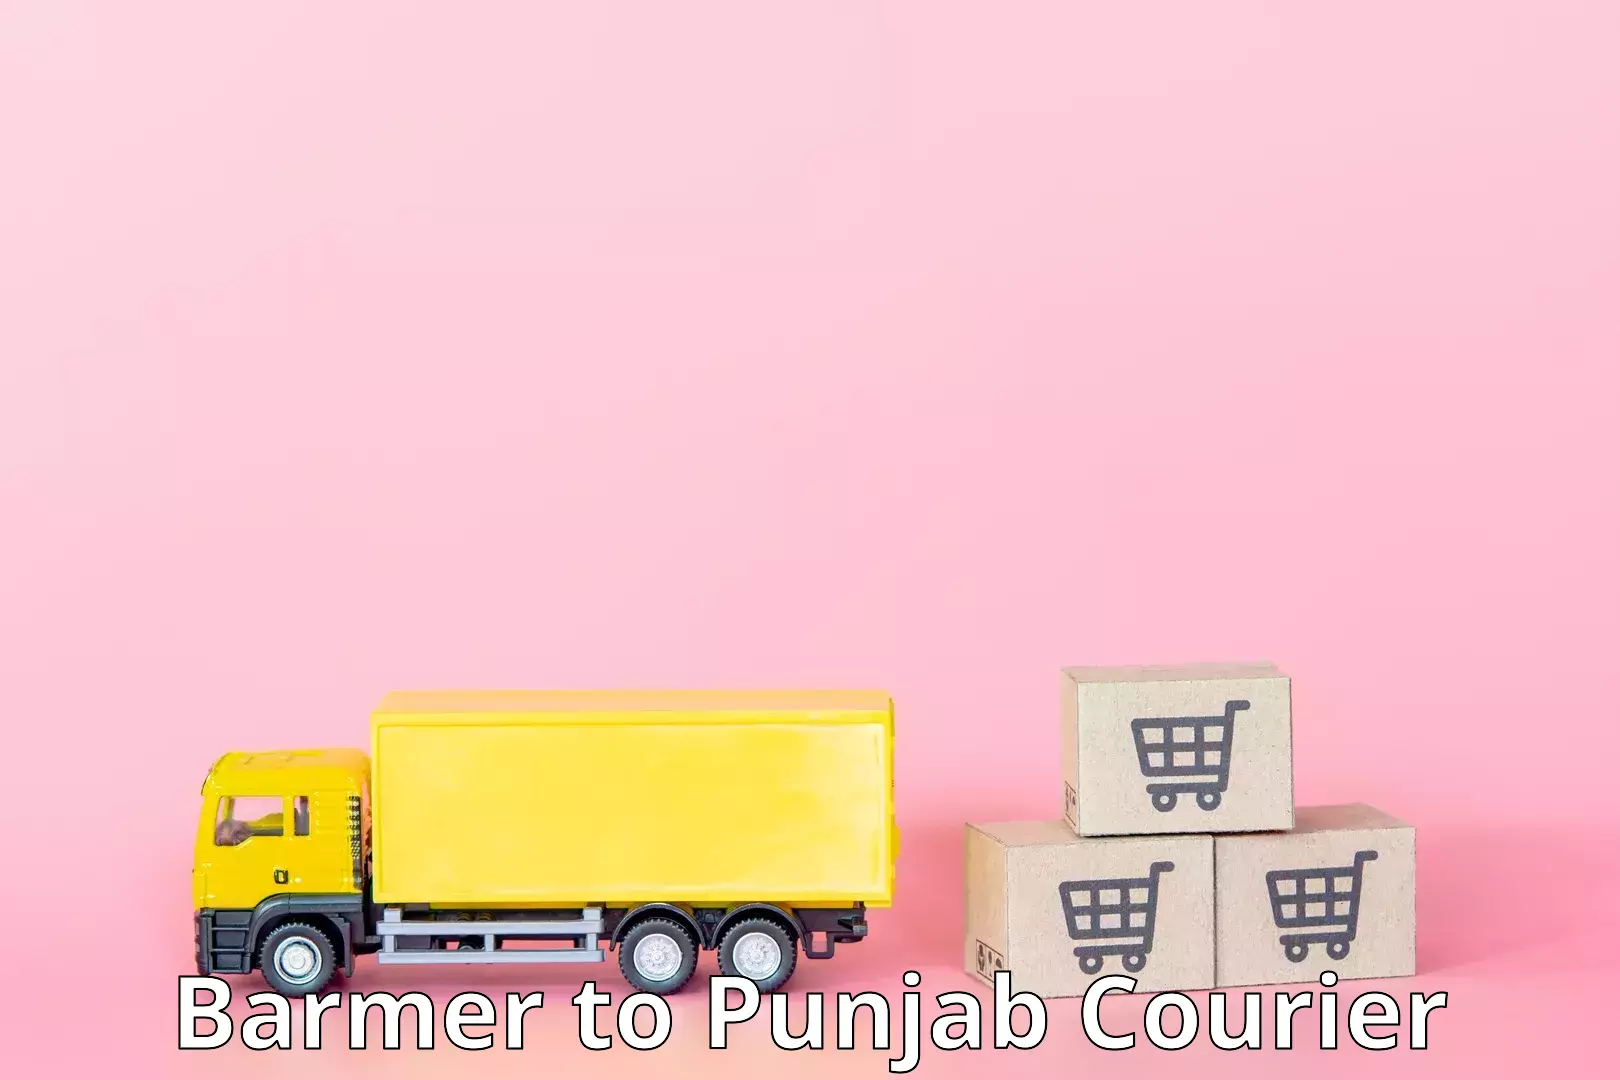 Reliable courier service Barmer to Pathankot